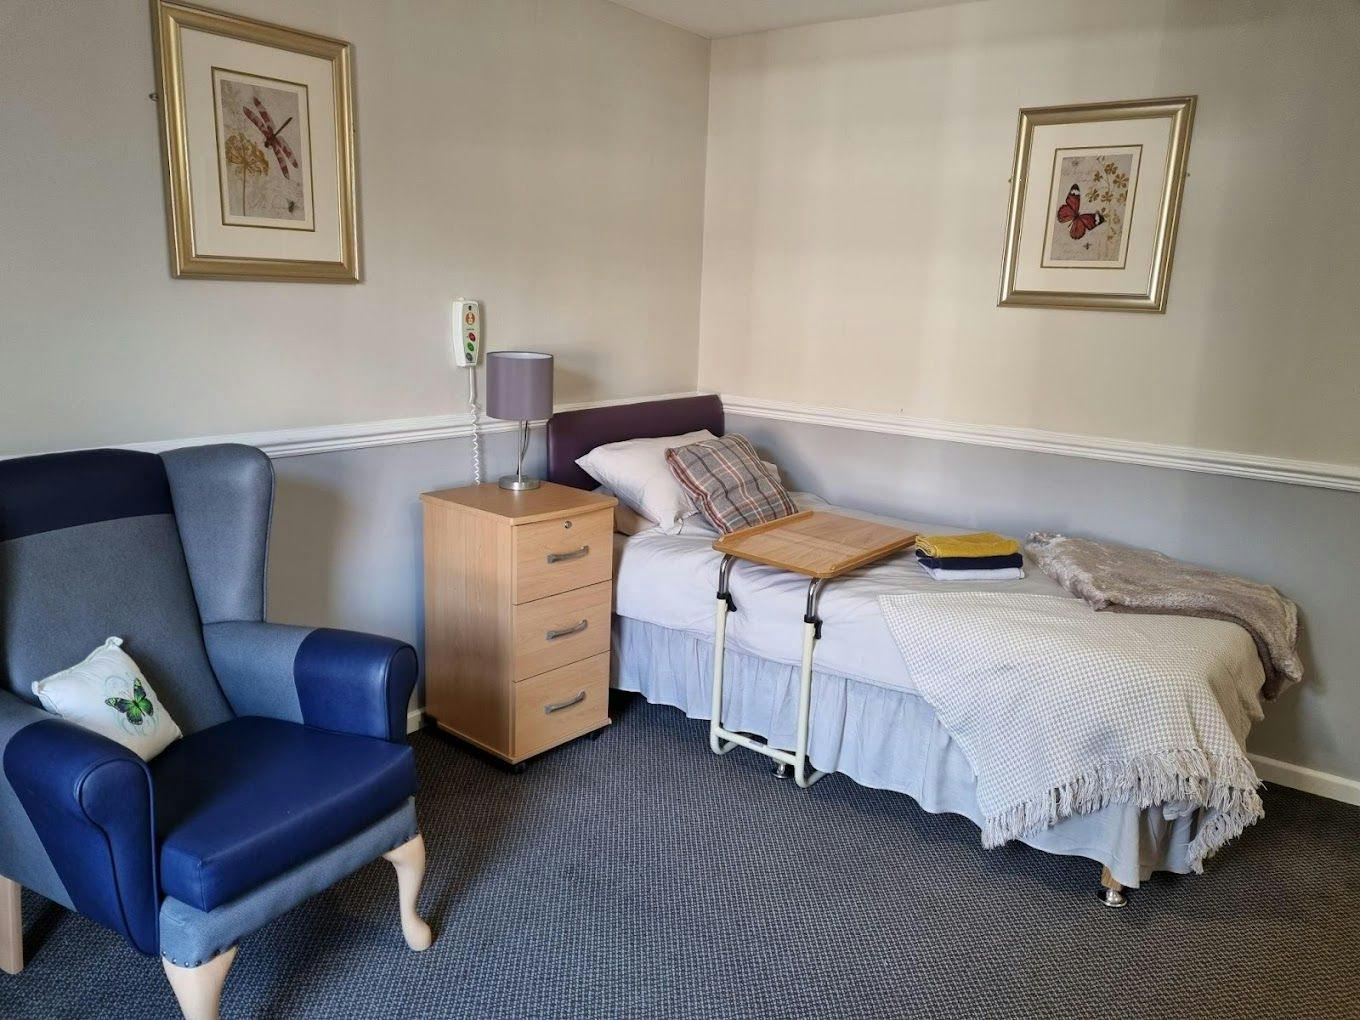 Bedroom at Agnes and Arthur Care Home in Stoke-on-Trent, Staffordshire